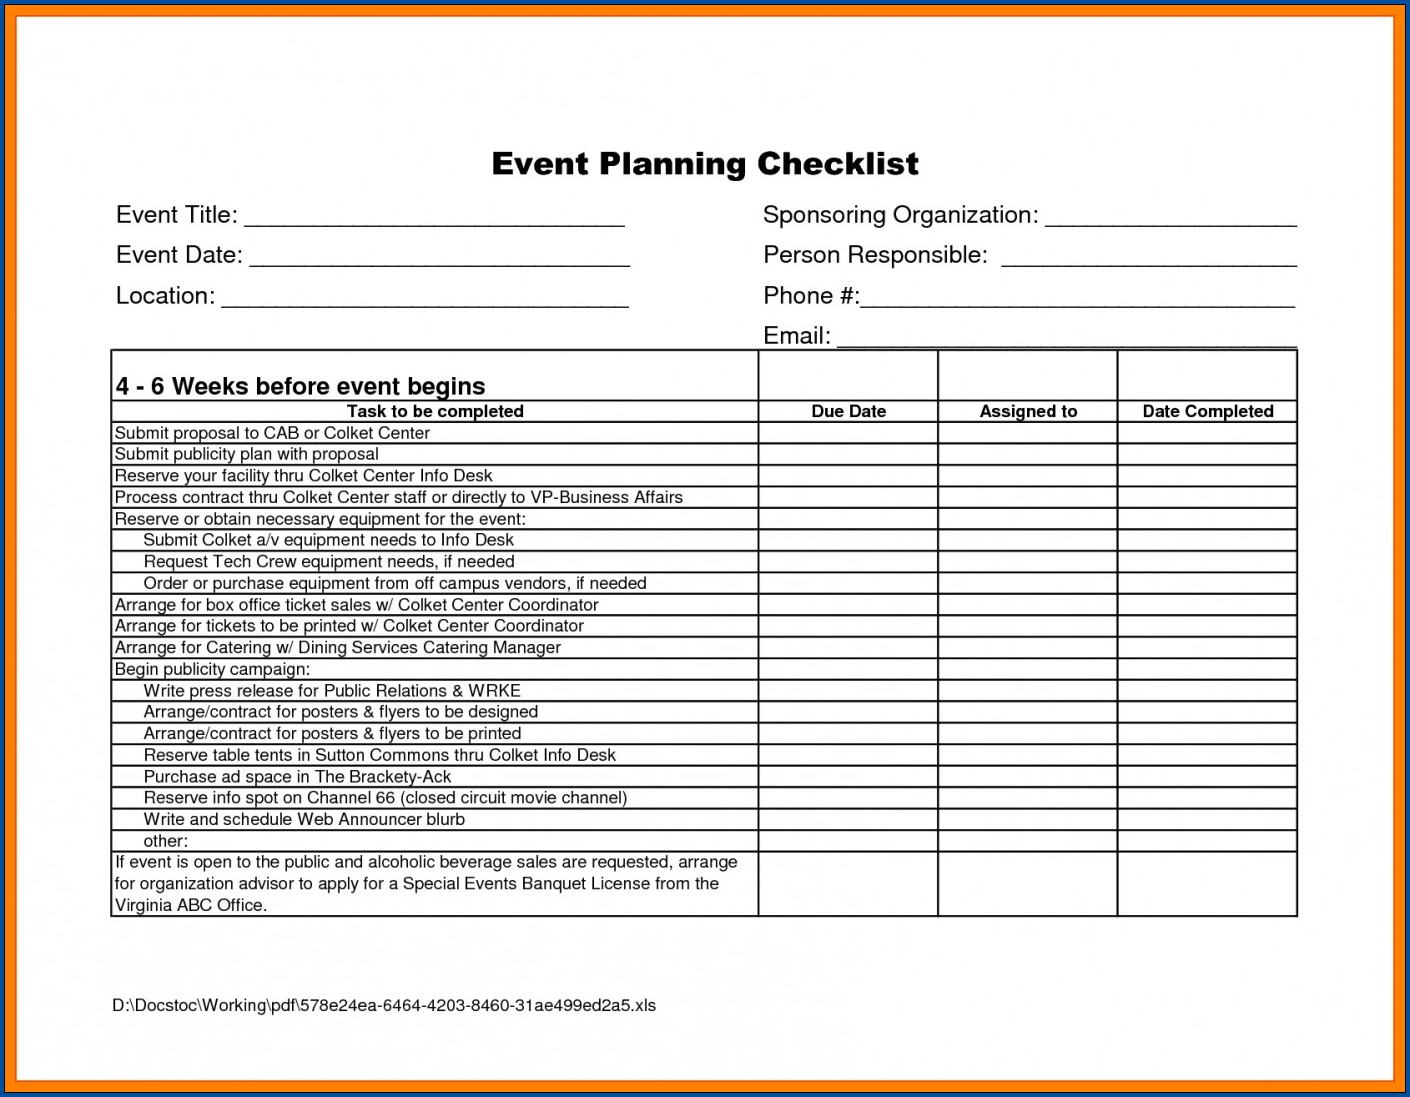 Example of Event Planning Checklist Template